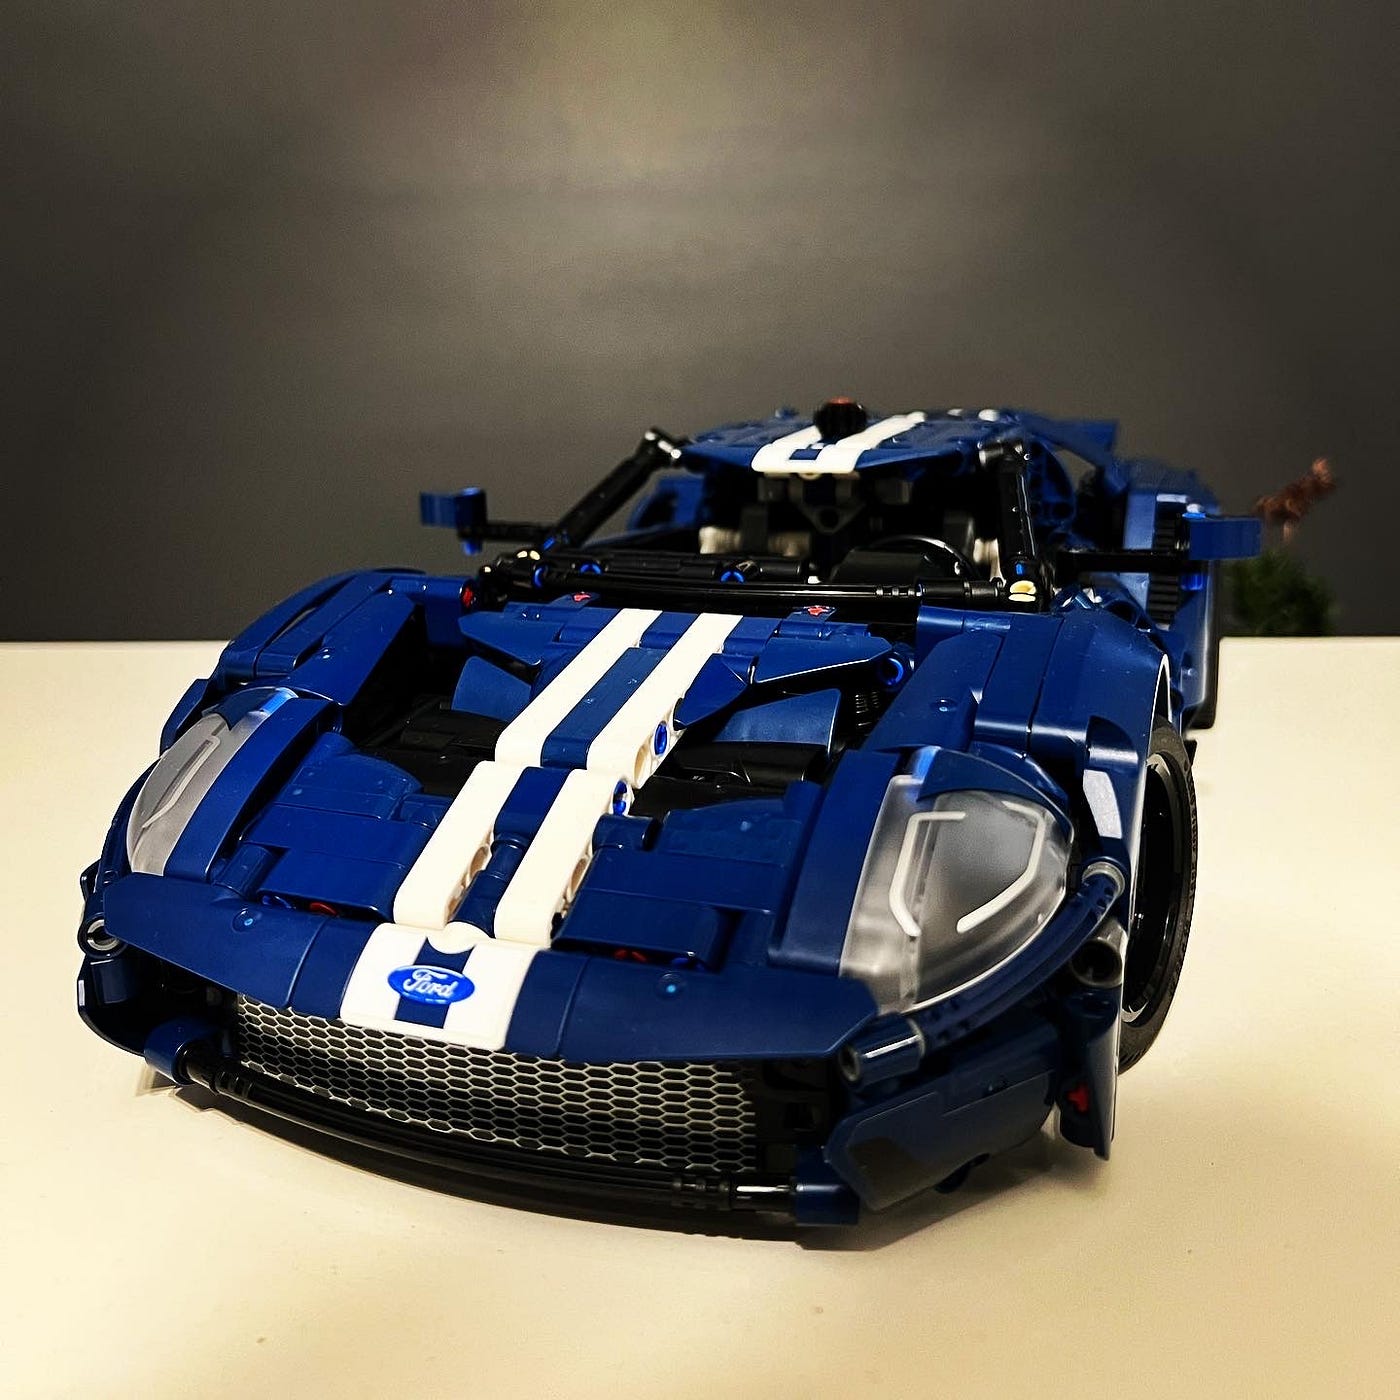 LEGO Technic 2022 Ford GT Brings The American Supercar To Your